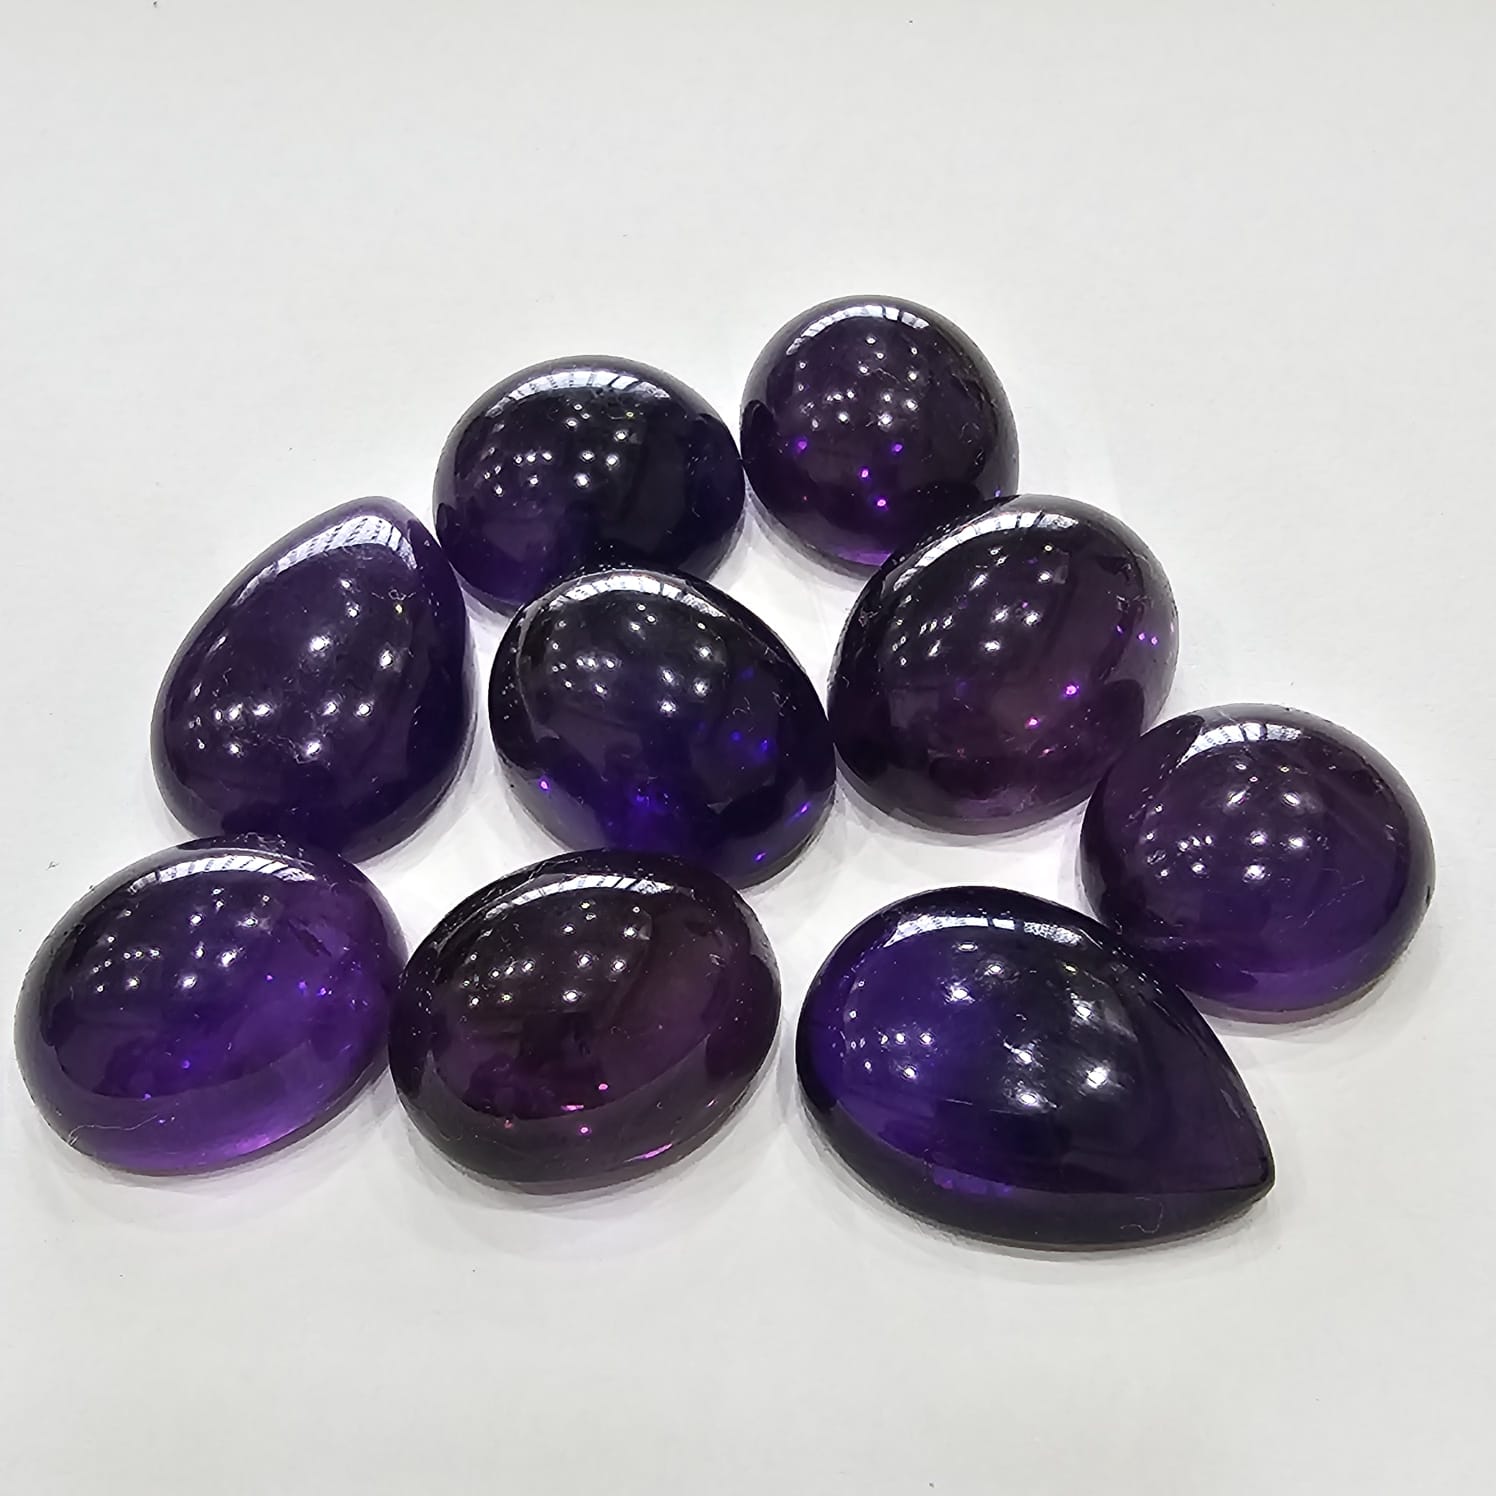 9 Pcs of Natural Amethyst Cabochon AAA Top Quality 20-28mm Size - The LabradoriteKing